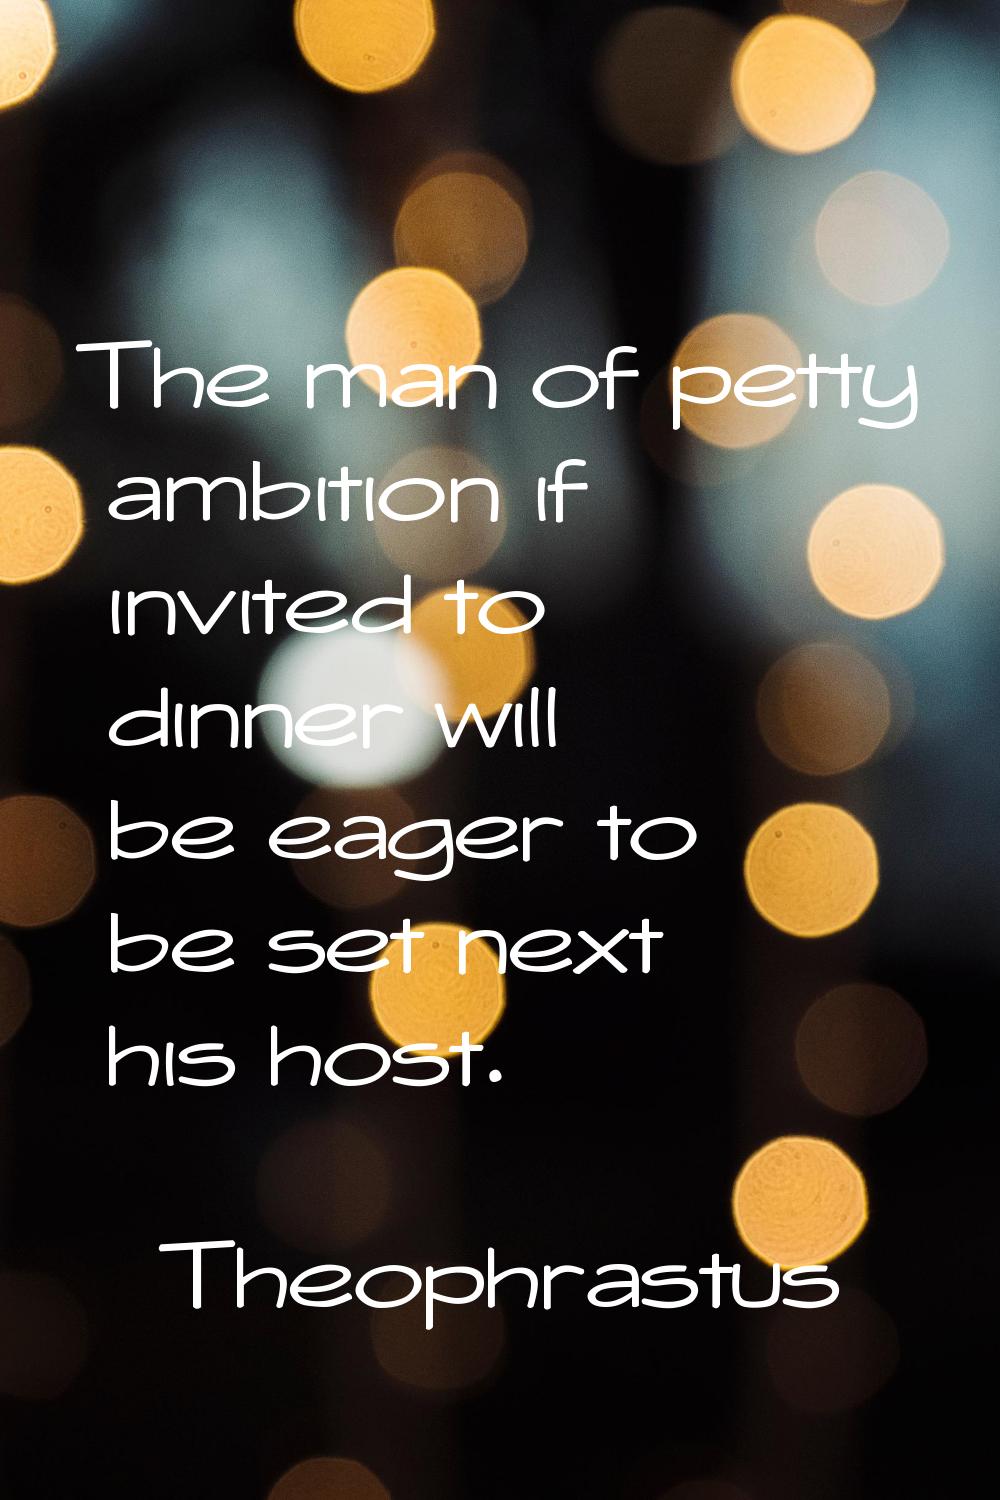 The man of petty ambition if invited to dinner will be eager to be set next his host.